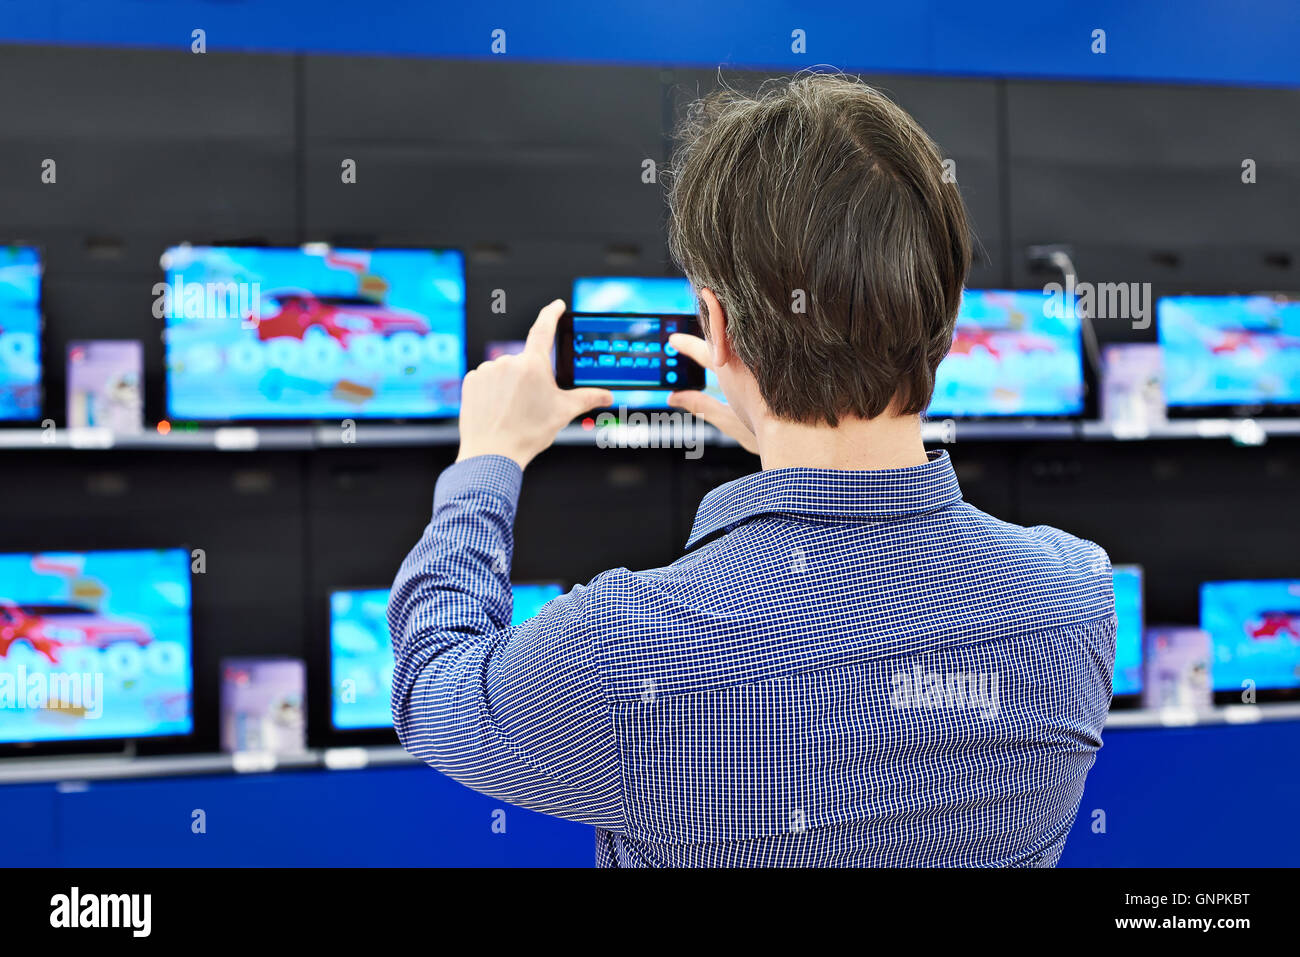 Man shoots with a smartphone TVs in shop Stock Photo